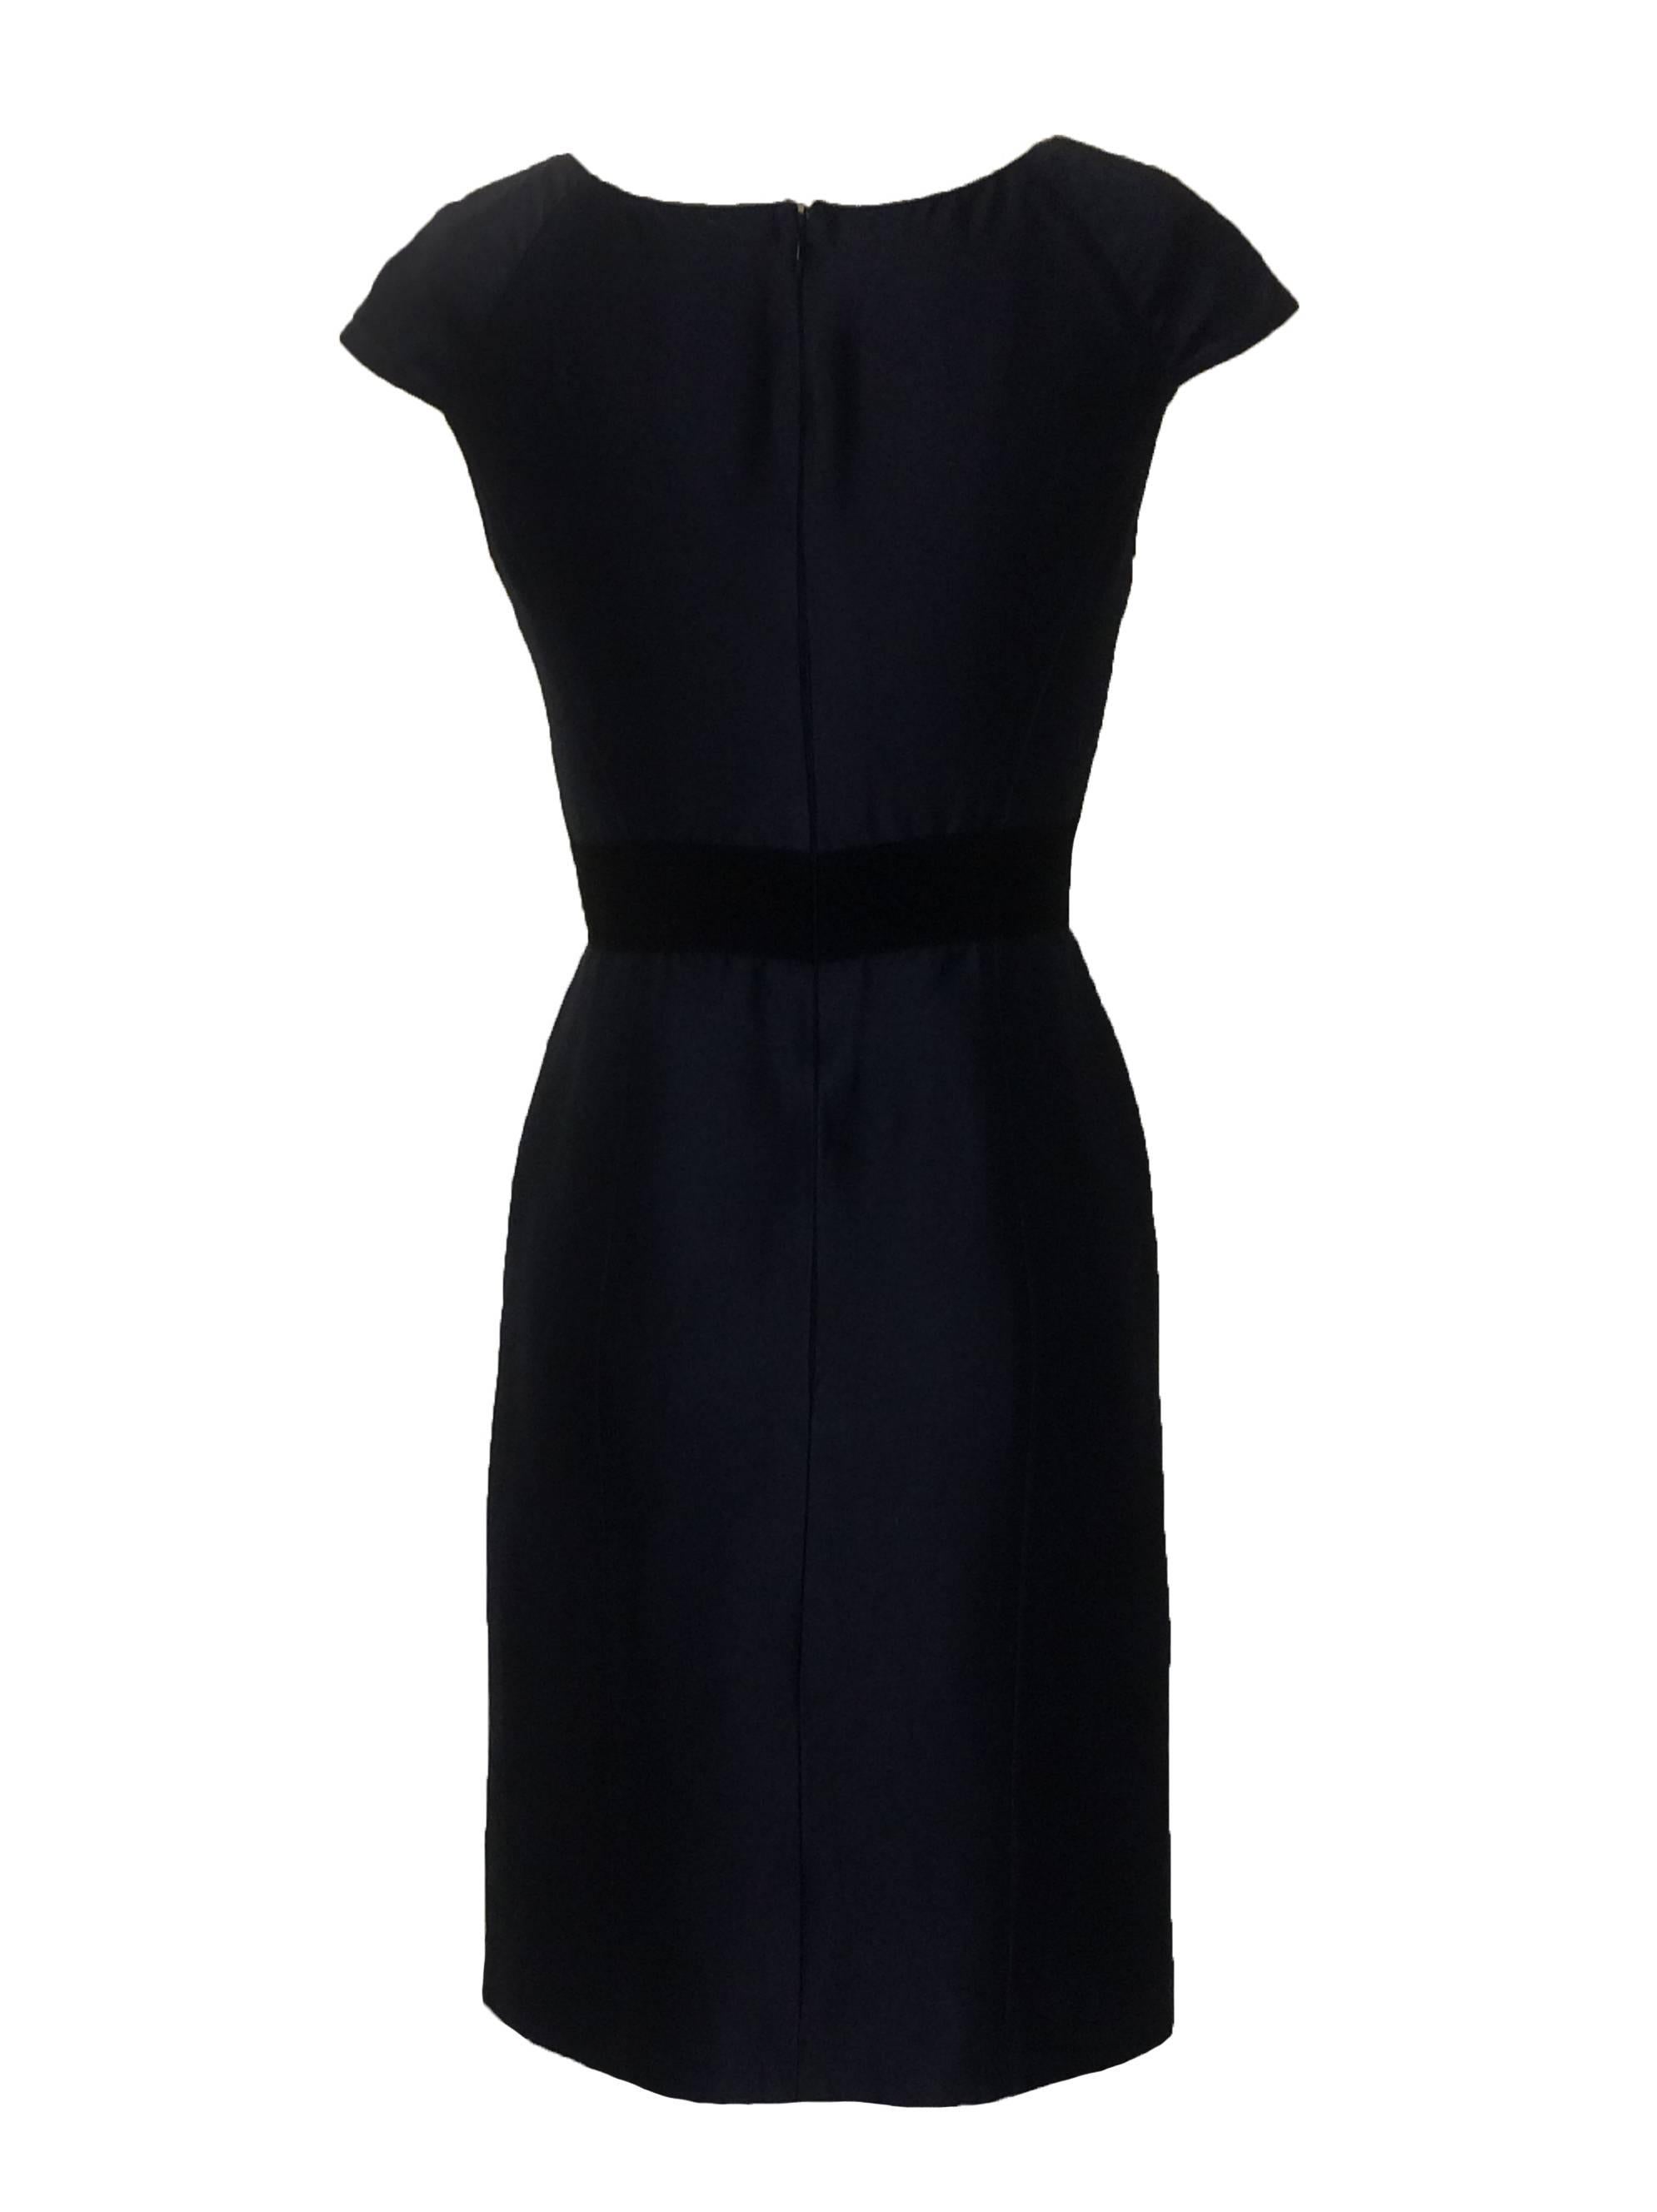 Oscar de la Renta navy pencil dress with tweed panel at front. Fringed grosgrain trim around panel and grosgrain accent at waist. Pockets hidden behind tweed at front waist. Back zip and hook and eye.

Made in Italy.

Cotton blend, fully